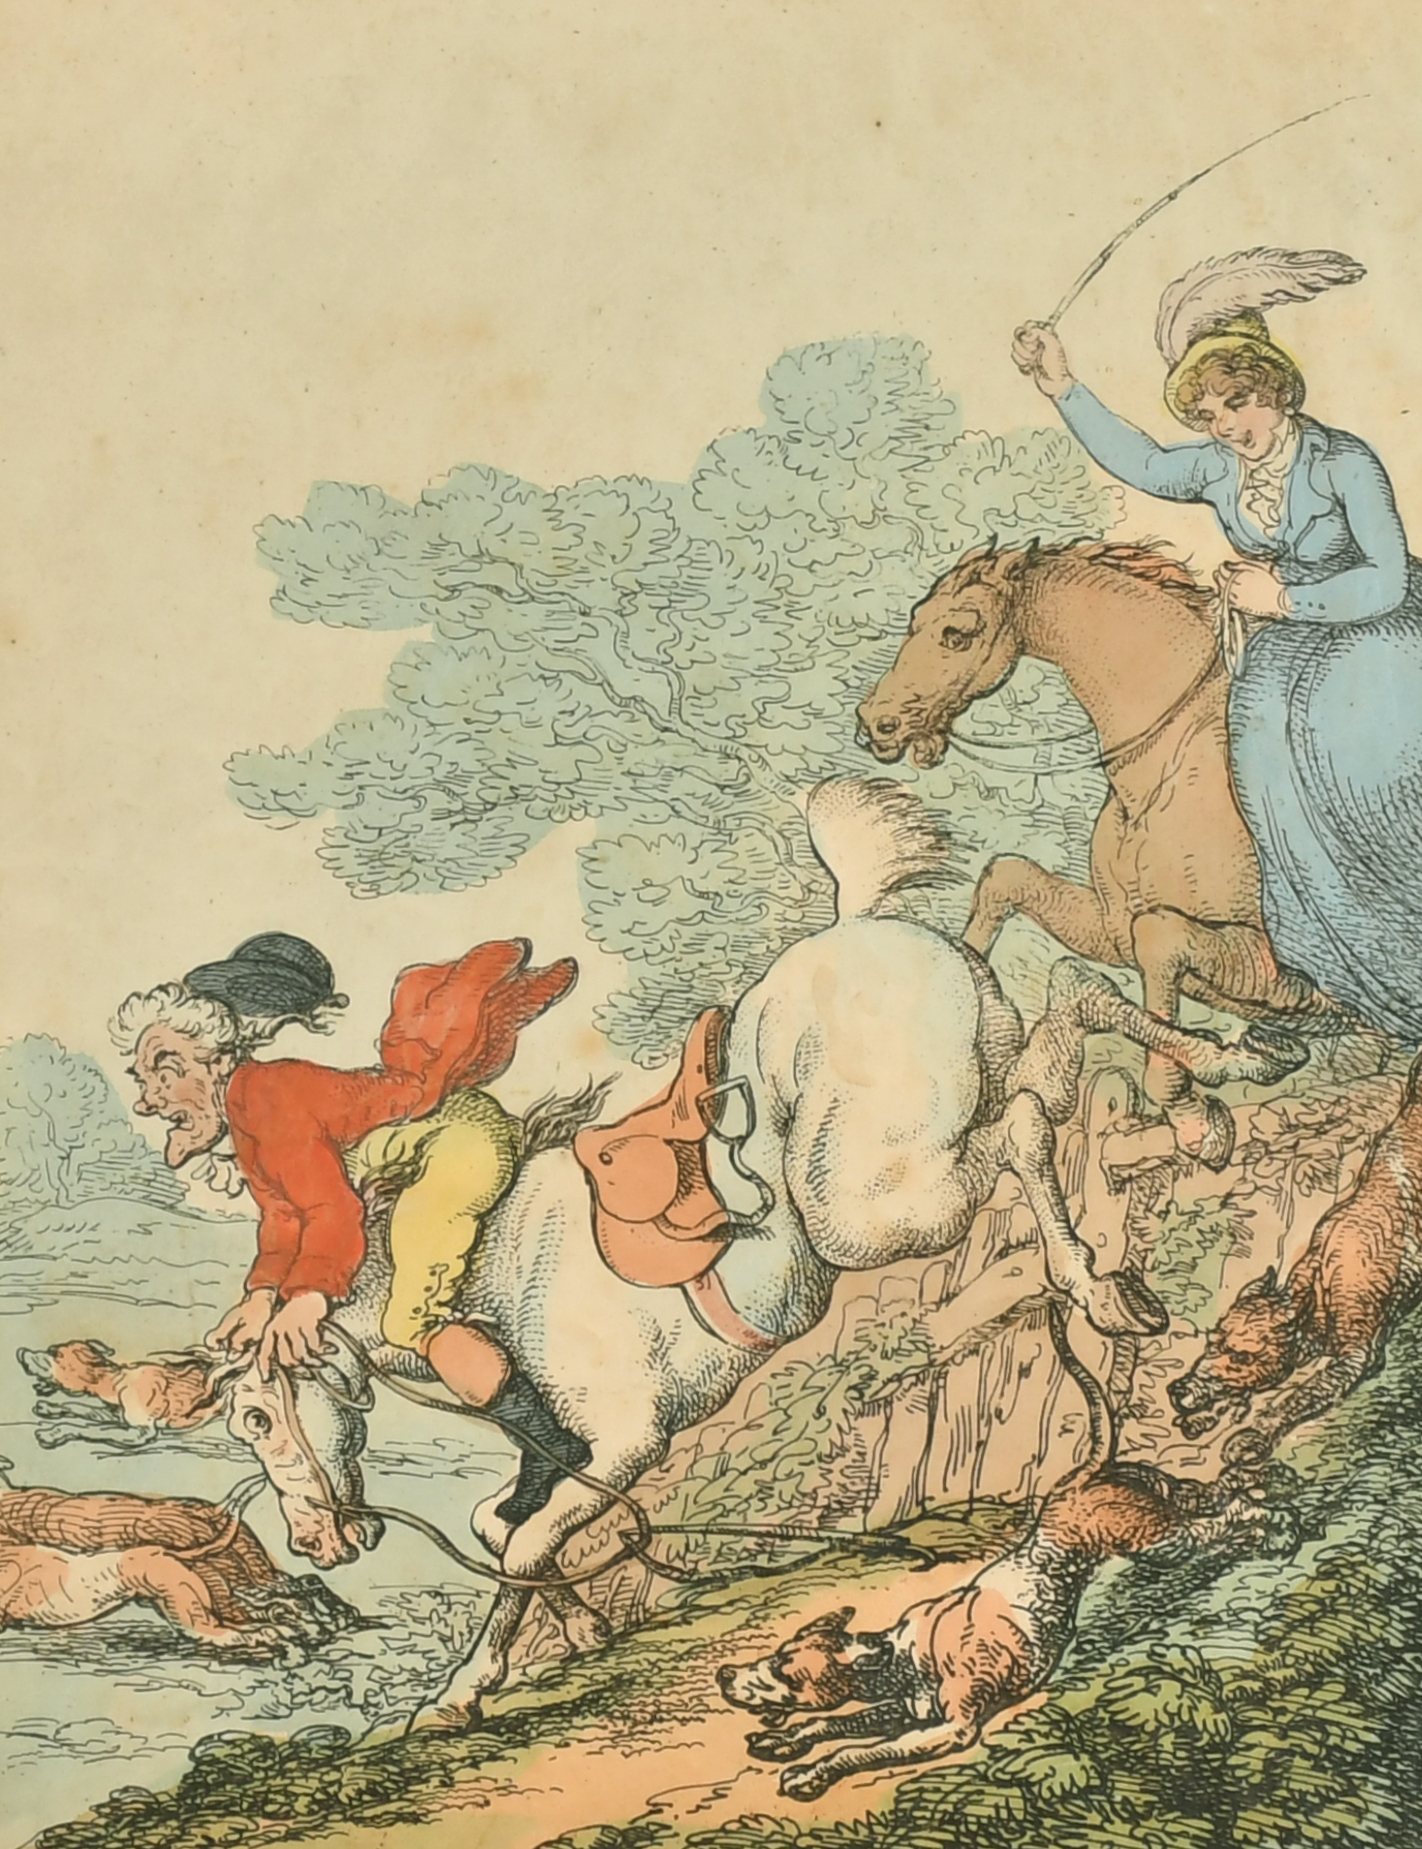 Thomas Rowlandson (1756-1827) British. "Easter Monday - or The Cockney Hunt", Etching, 12" x 9" (